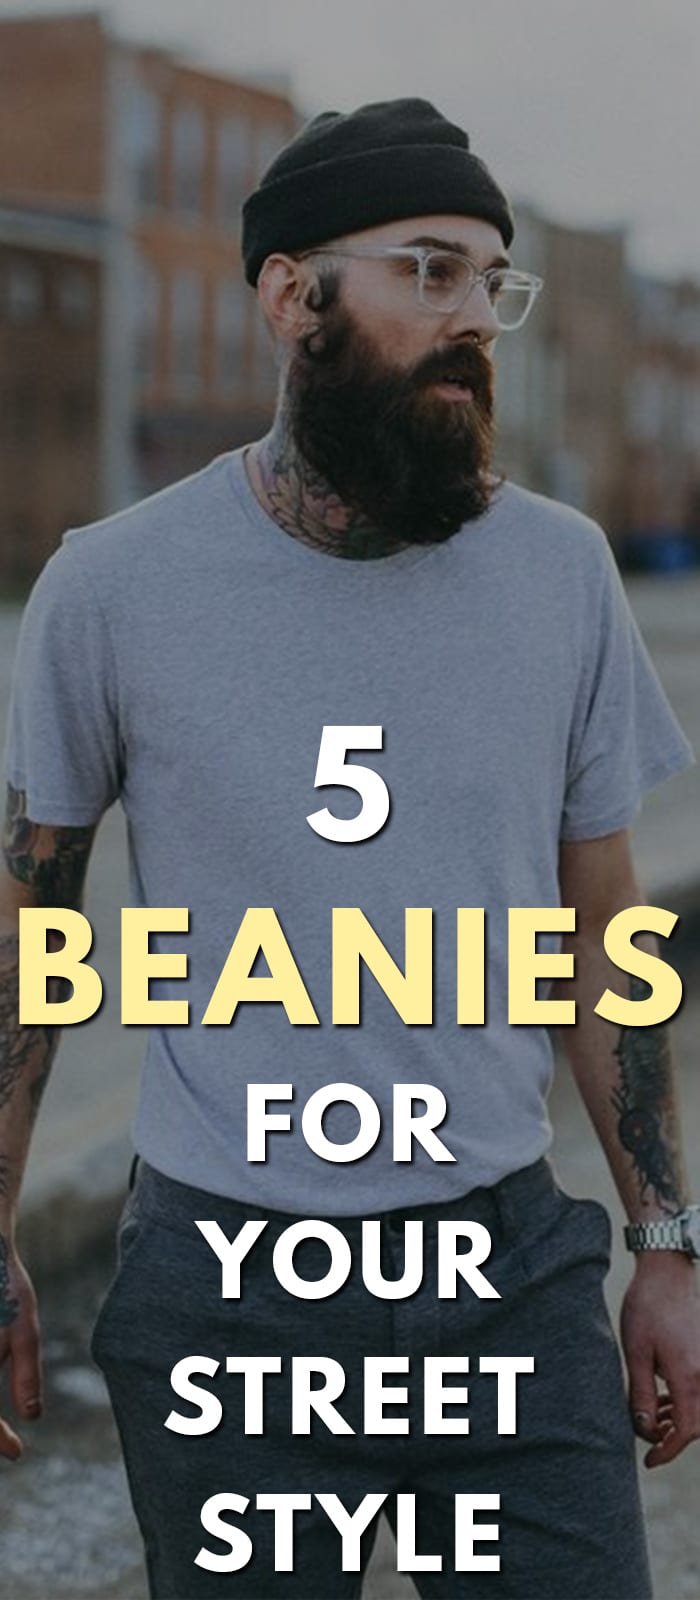 5 Beanies For Your Street Style